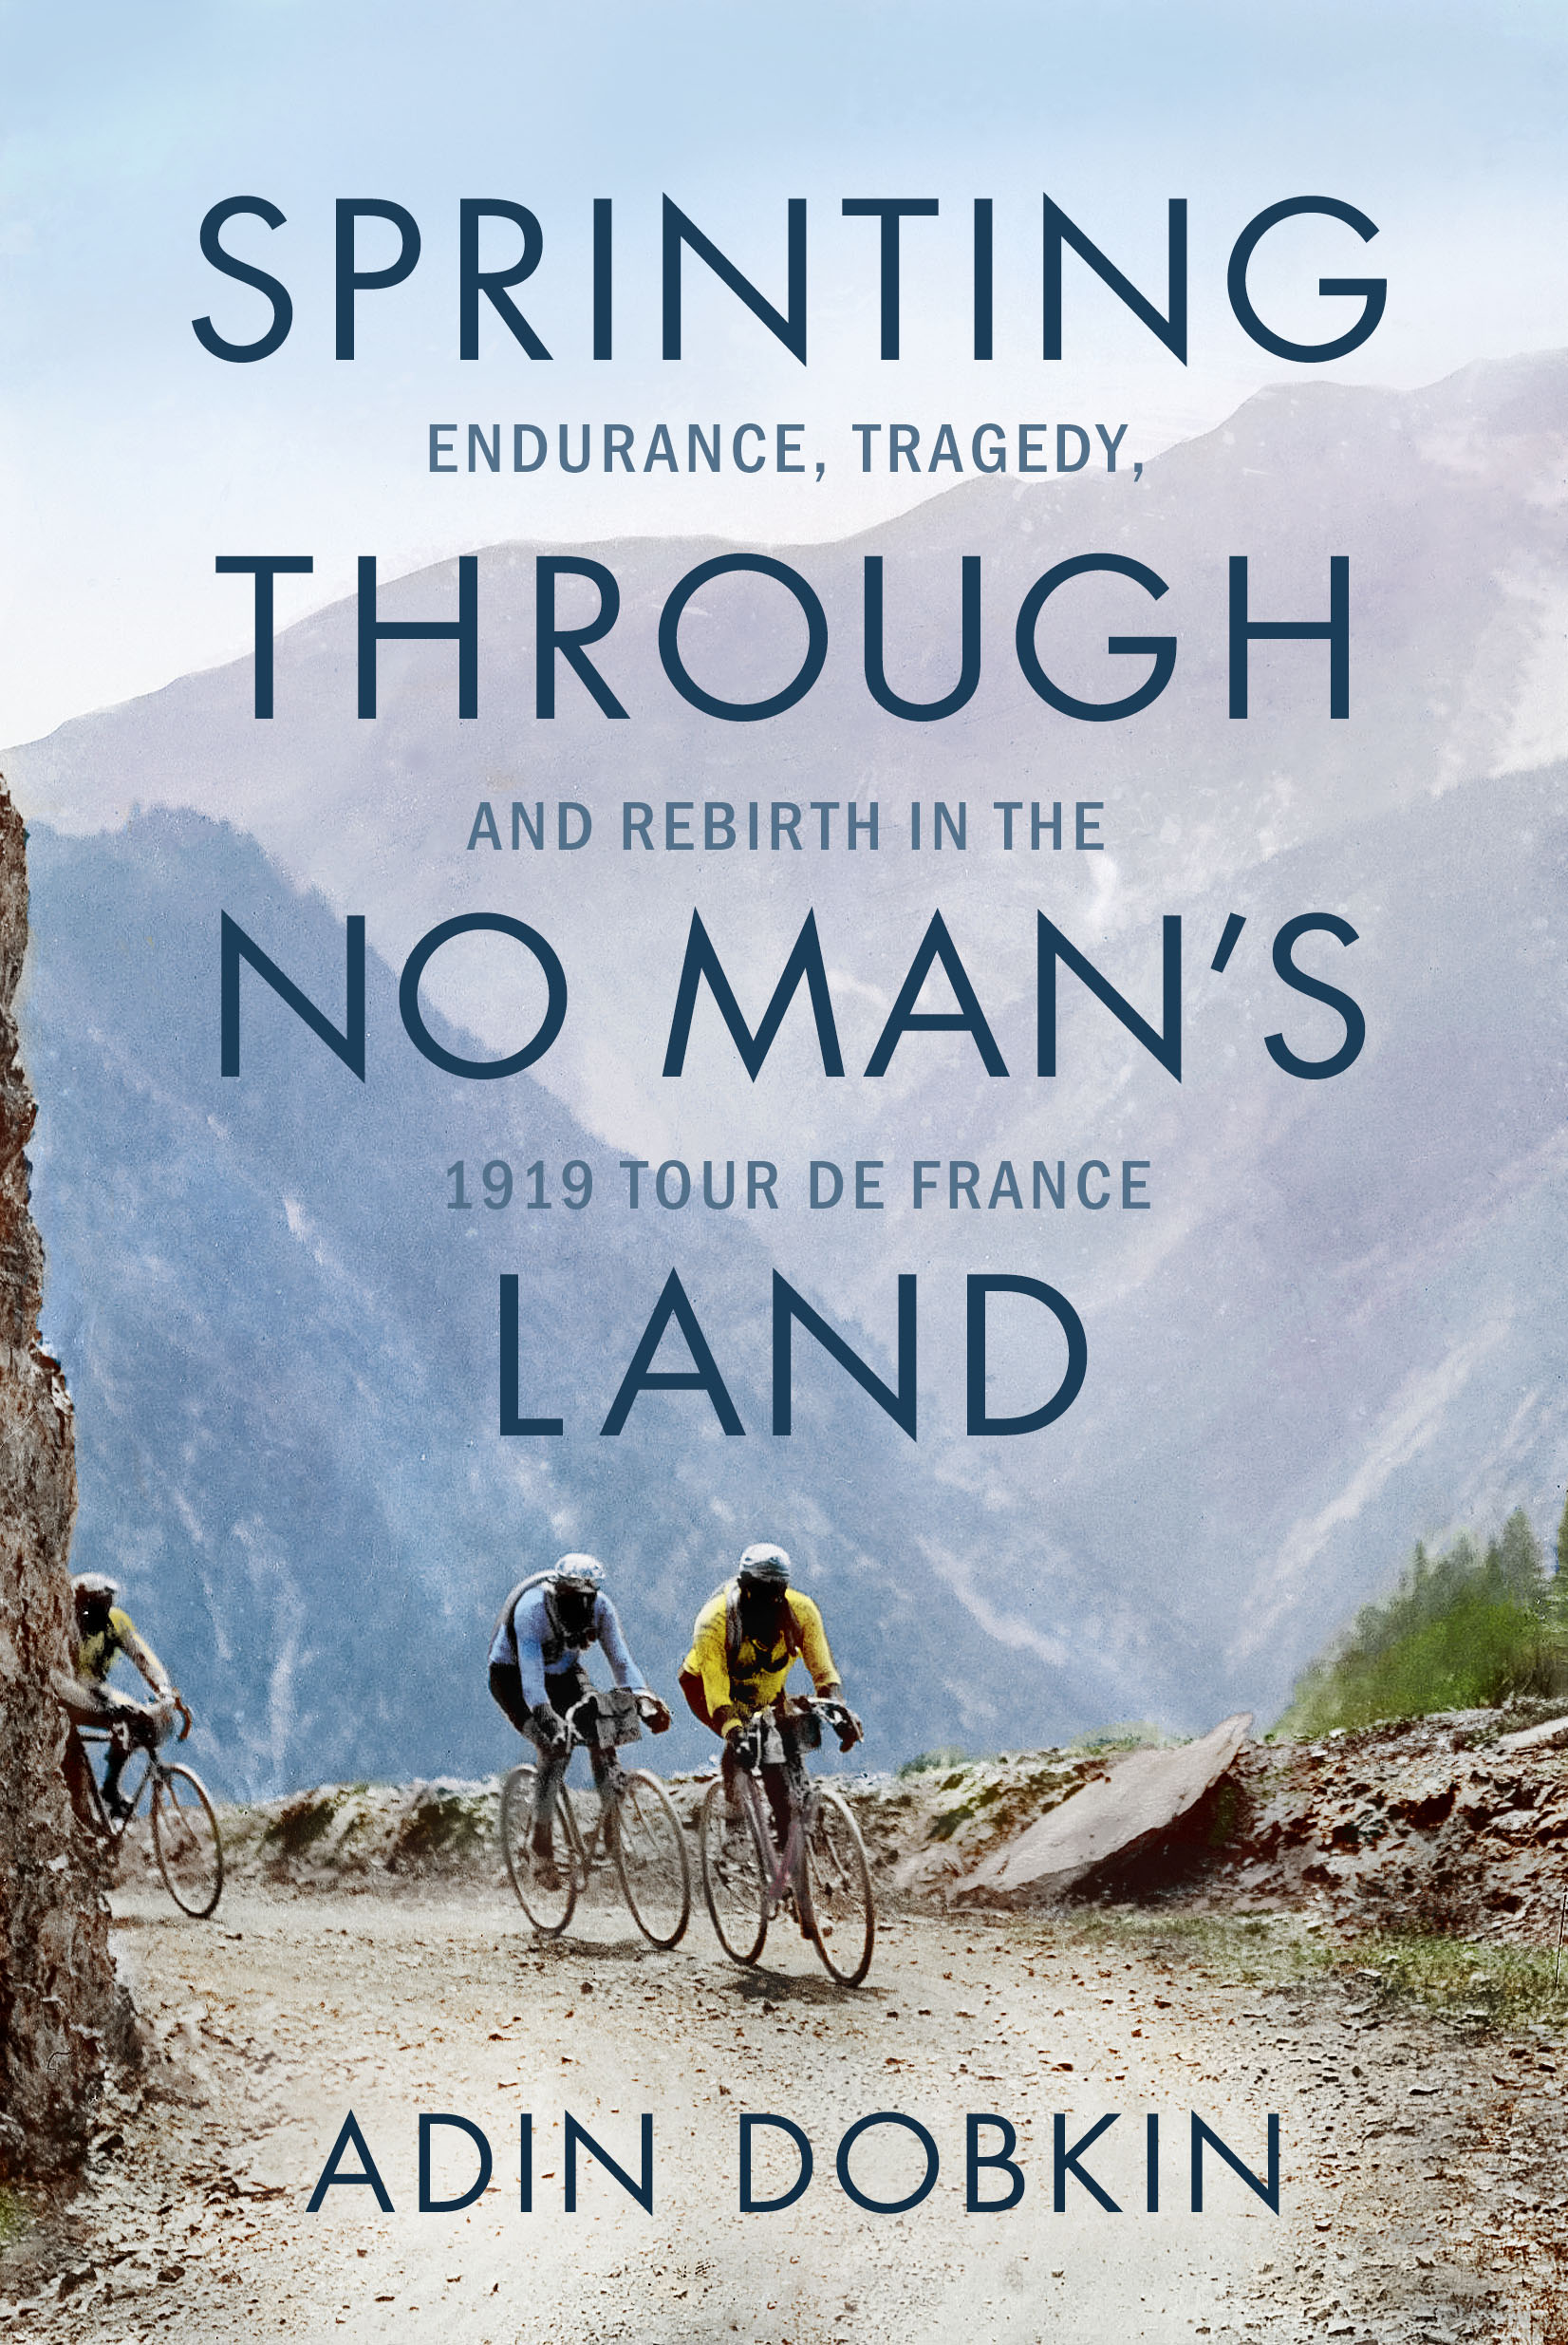 Virtual Book Launch: Sprinting Through No Man's Land by Adin Dobkin in conversation with Phil Klay